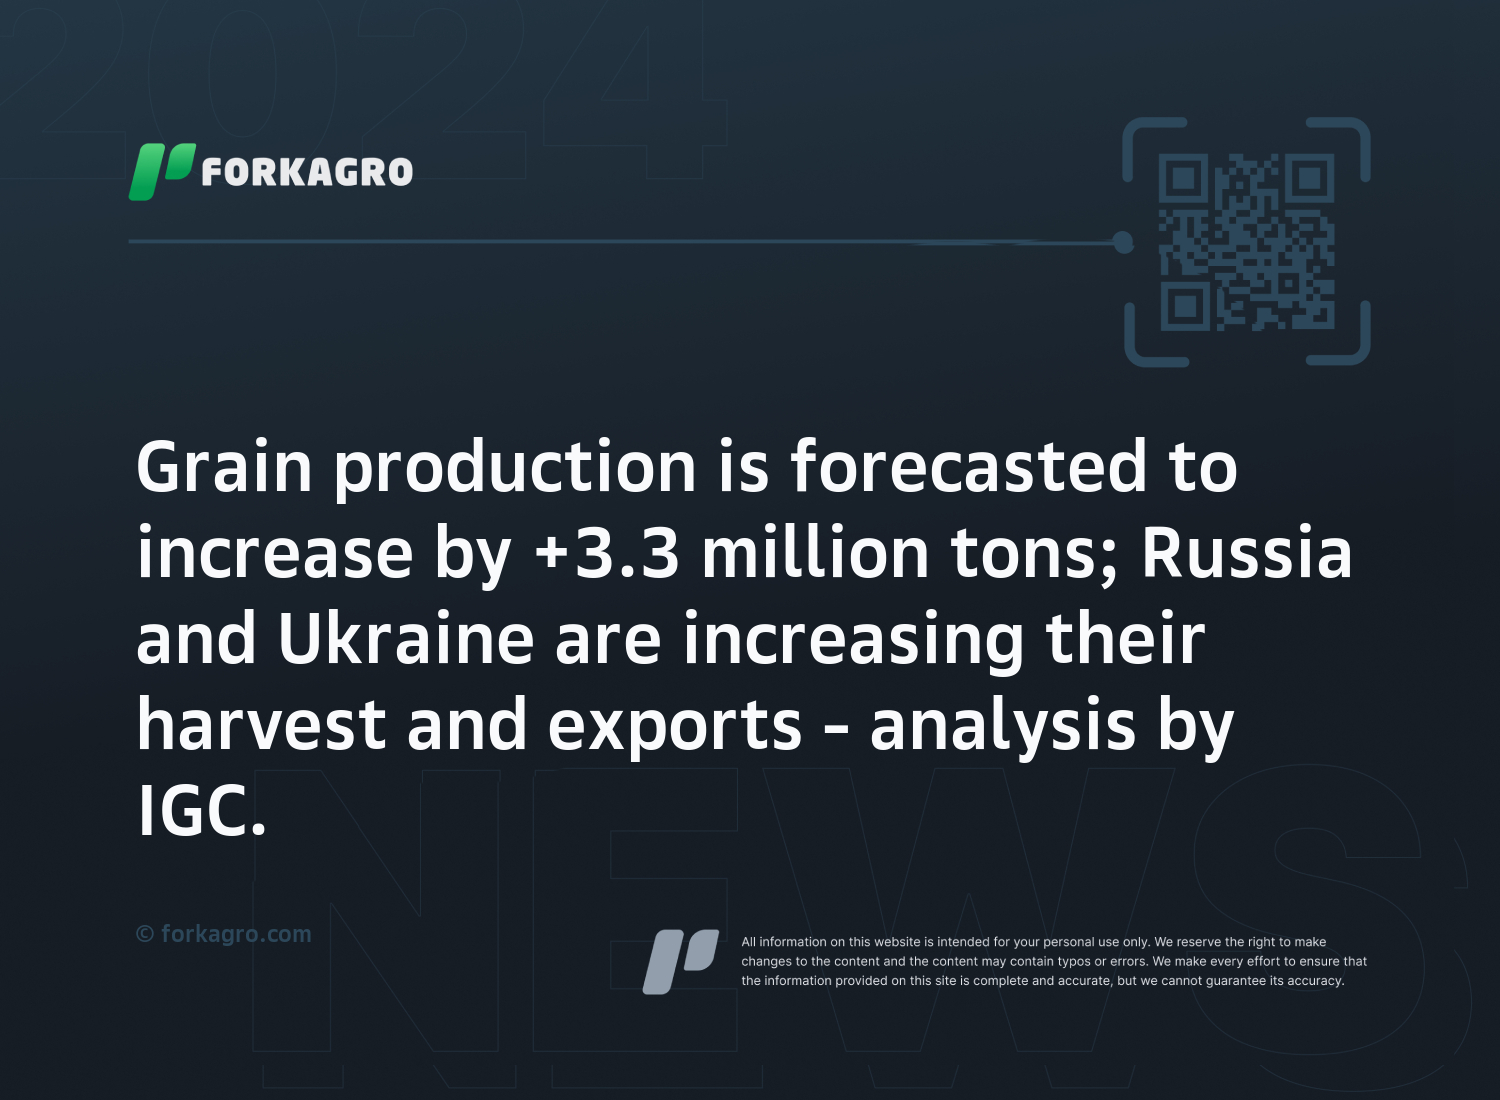 Grain production is forecasted to increase by +3.3 million tons; Russia and Ukraine are increasing their harvest and exports - analysis by IGC.